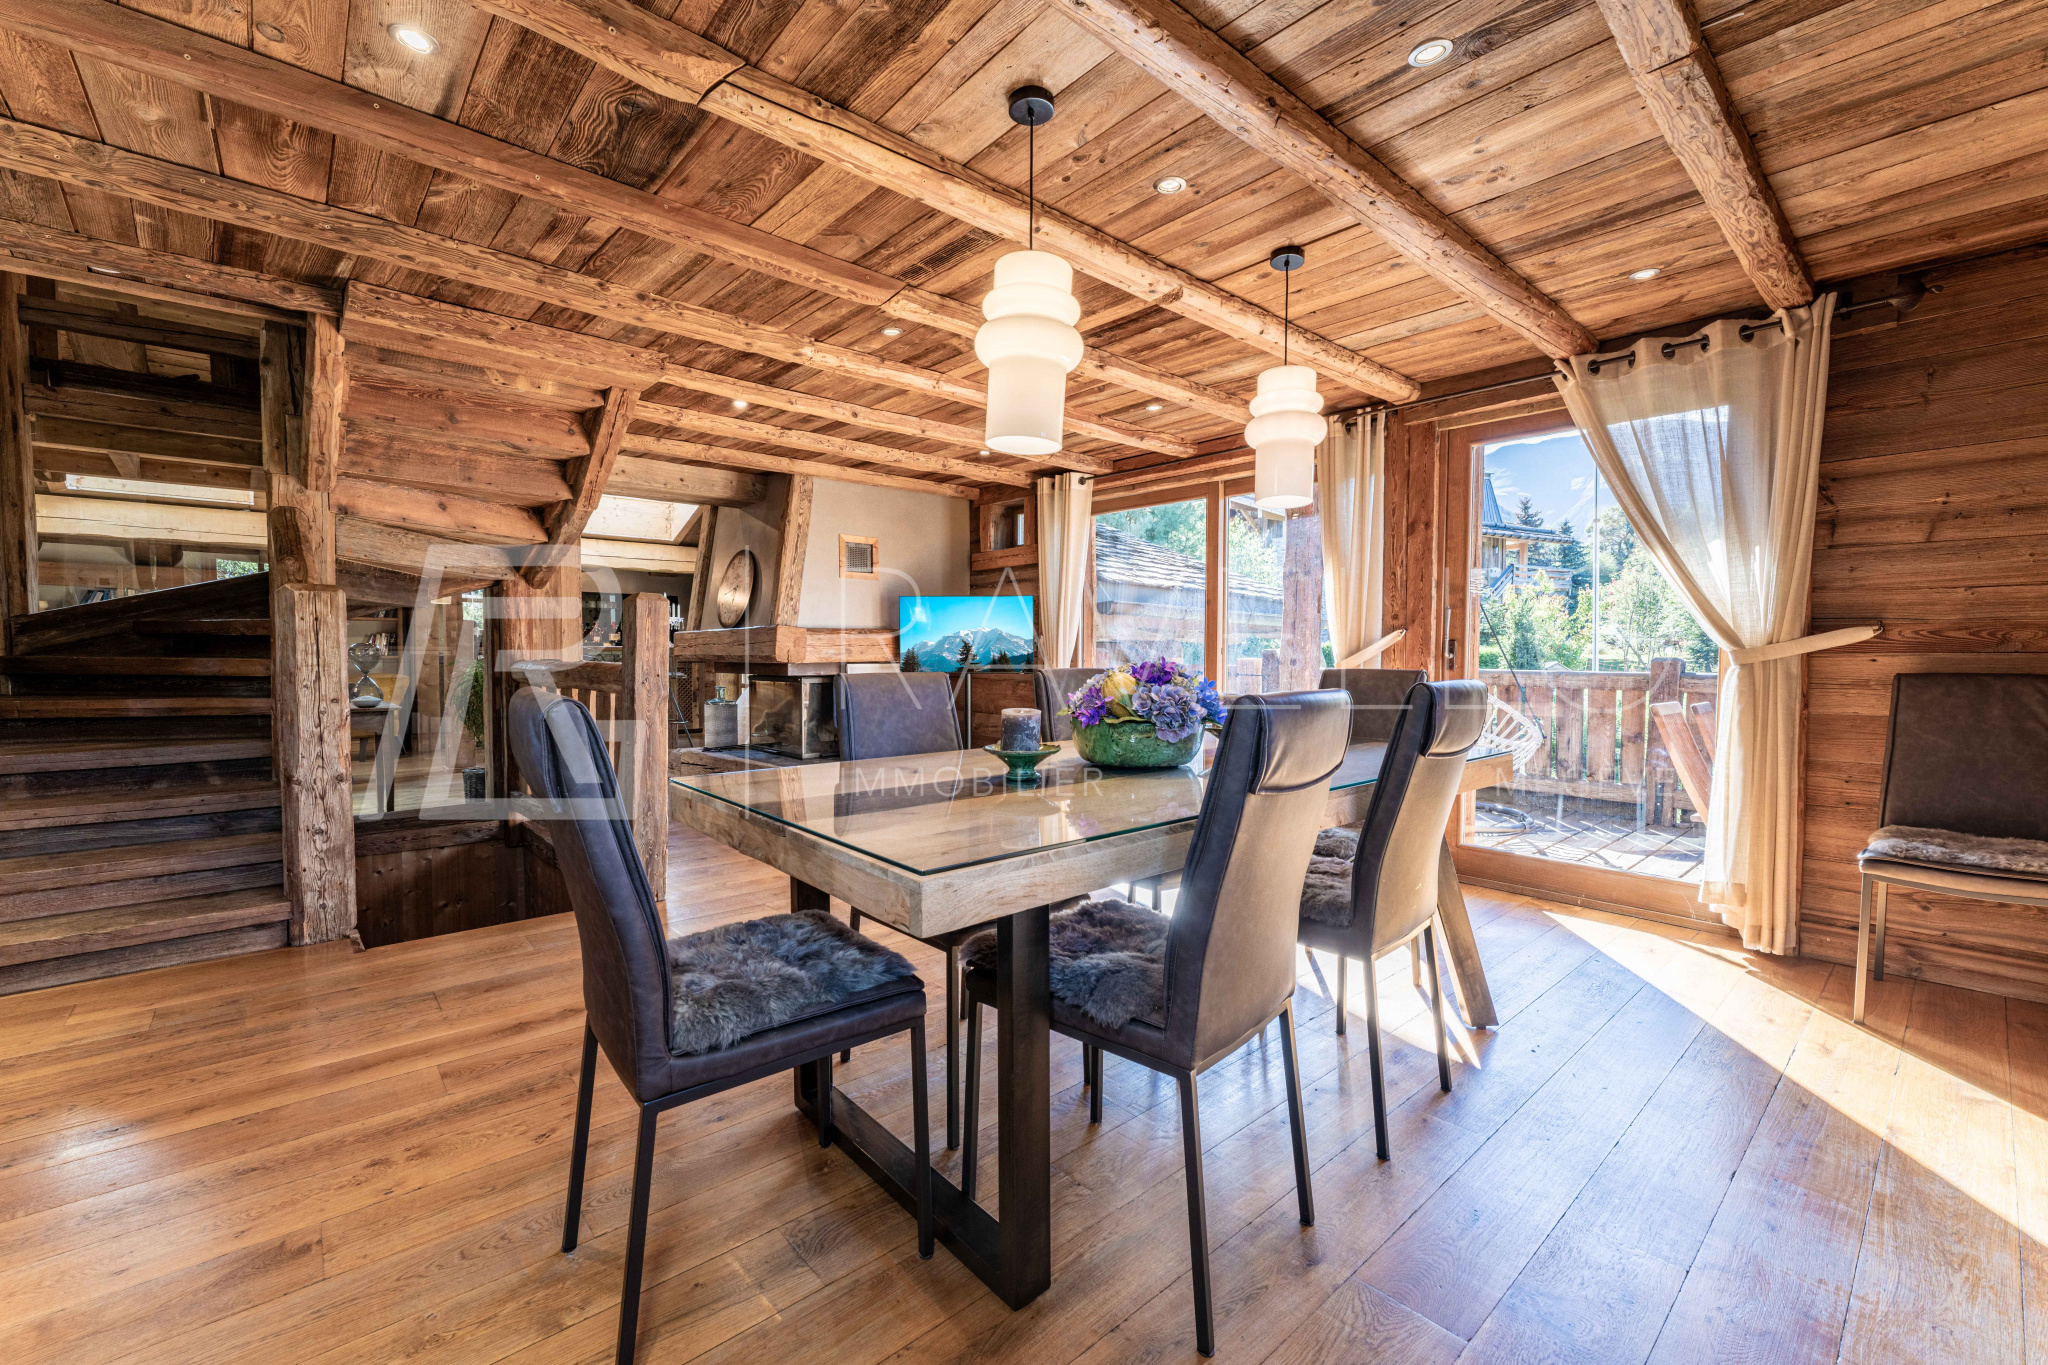 Photo of Megève Mont d'Arbois - Luxury chalet at the foot of the golf course and slopes of Mont d'Arbois